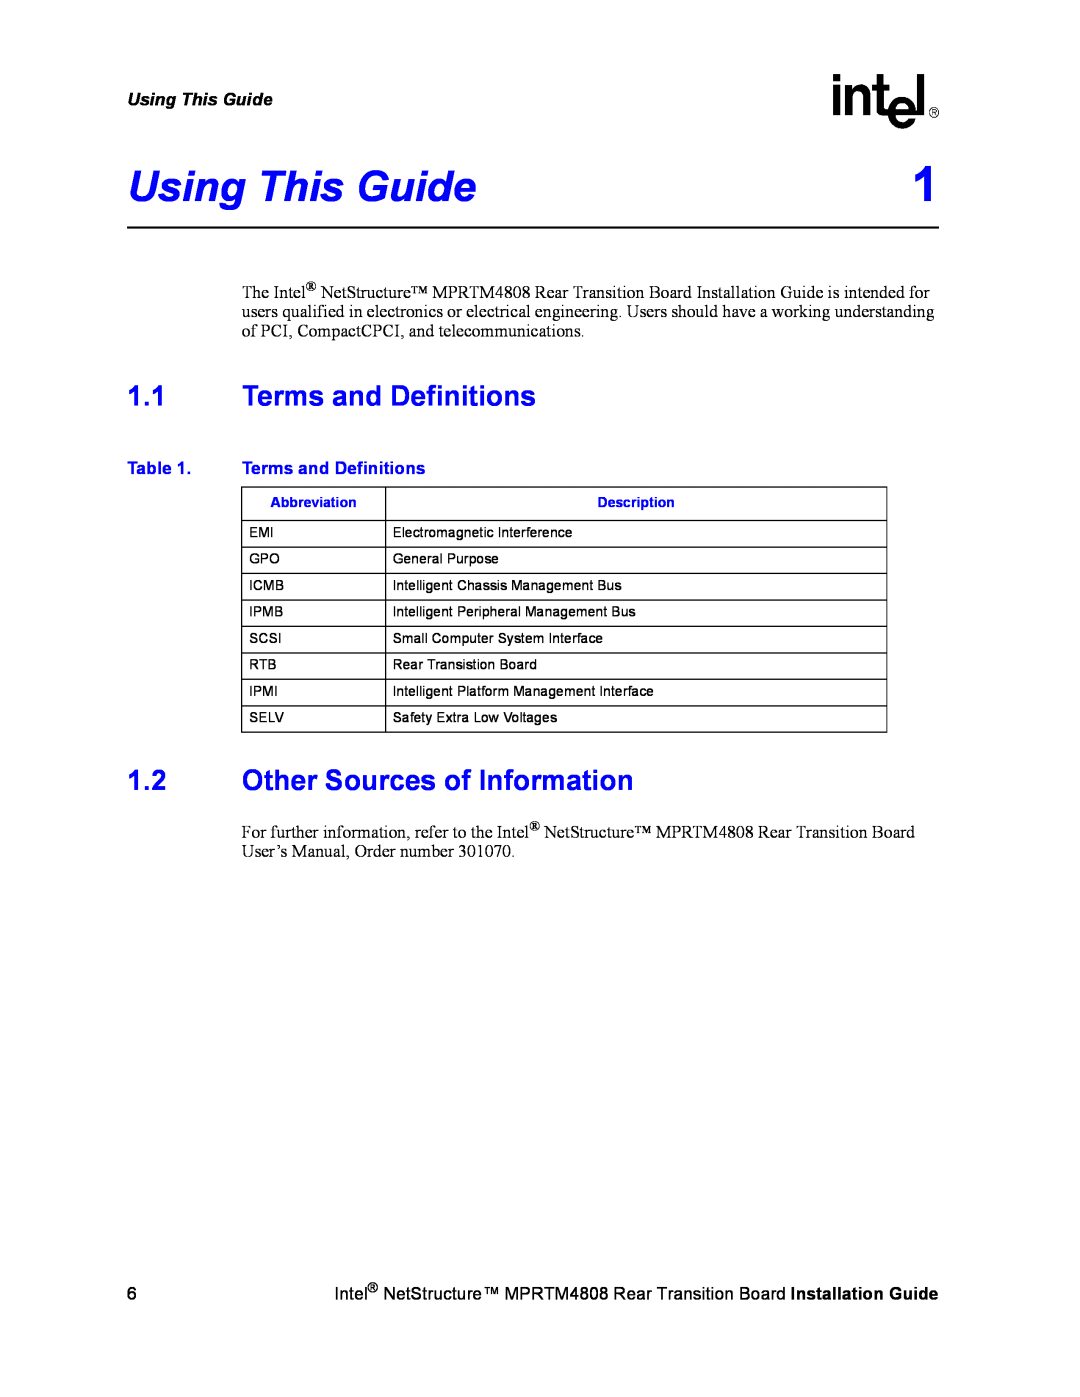 Intel MPRTM4808 manual Using This Guide, 1.1Terms and Definitions, 1.2Other Sources of Information, Table 